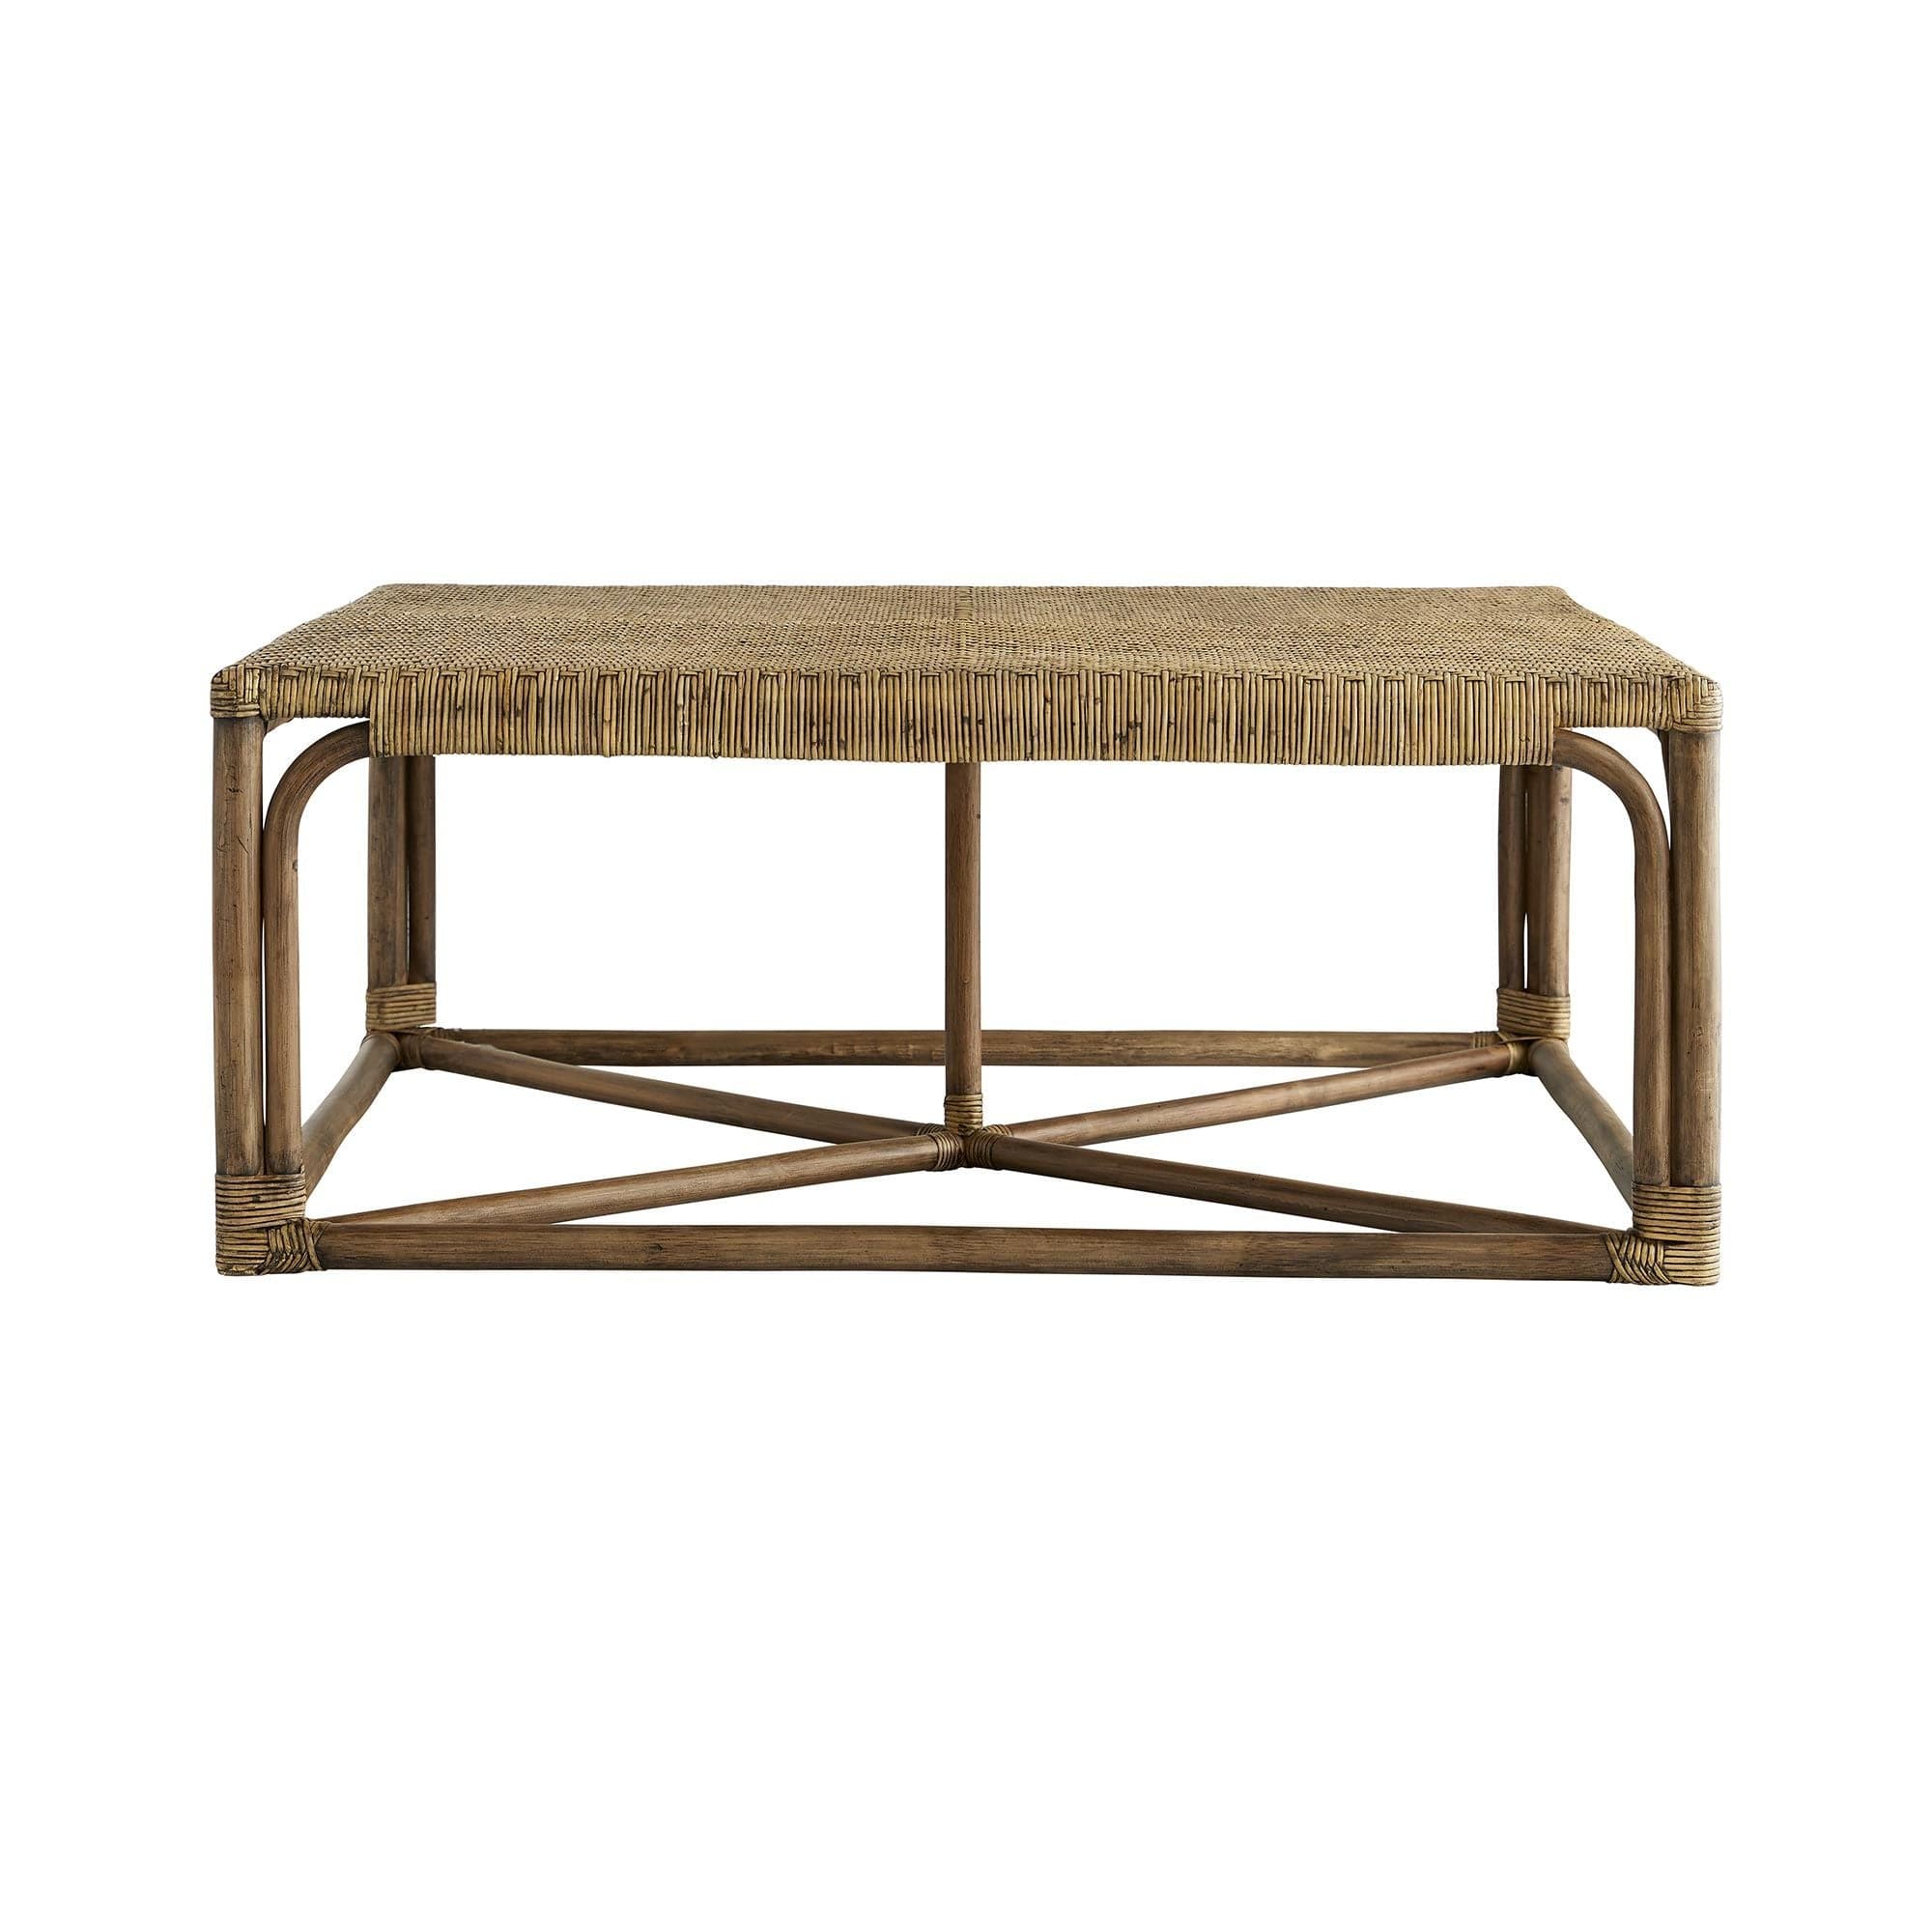 UNDERHILL COCKTAIL TABLE in Tobacco finish